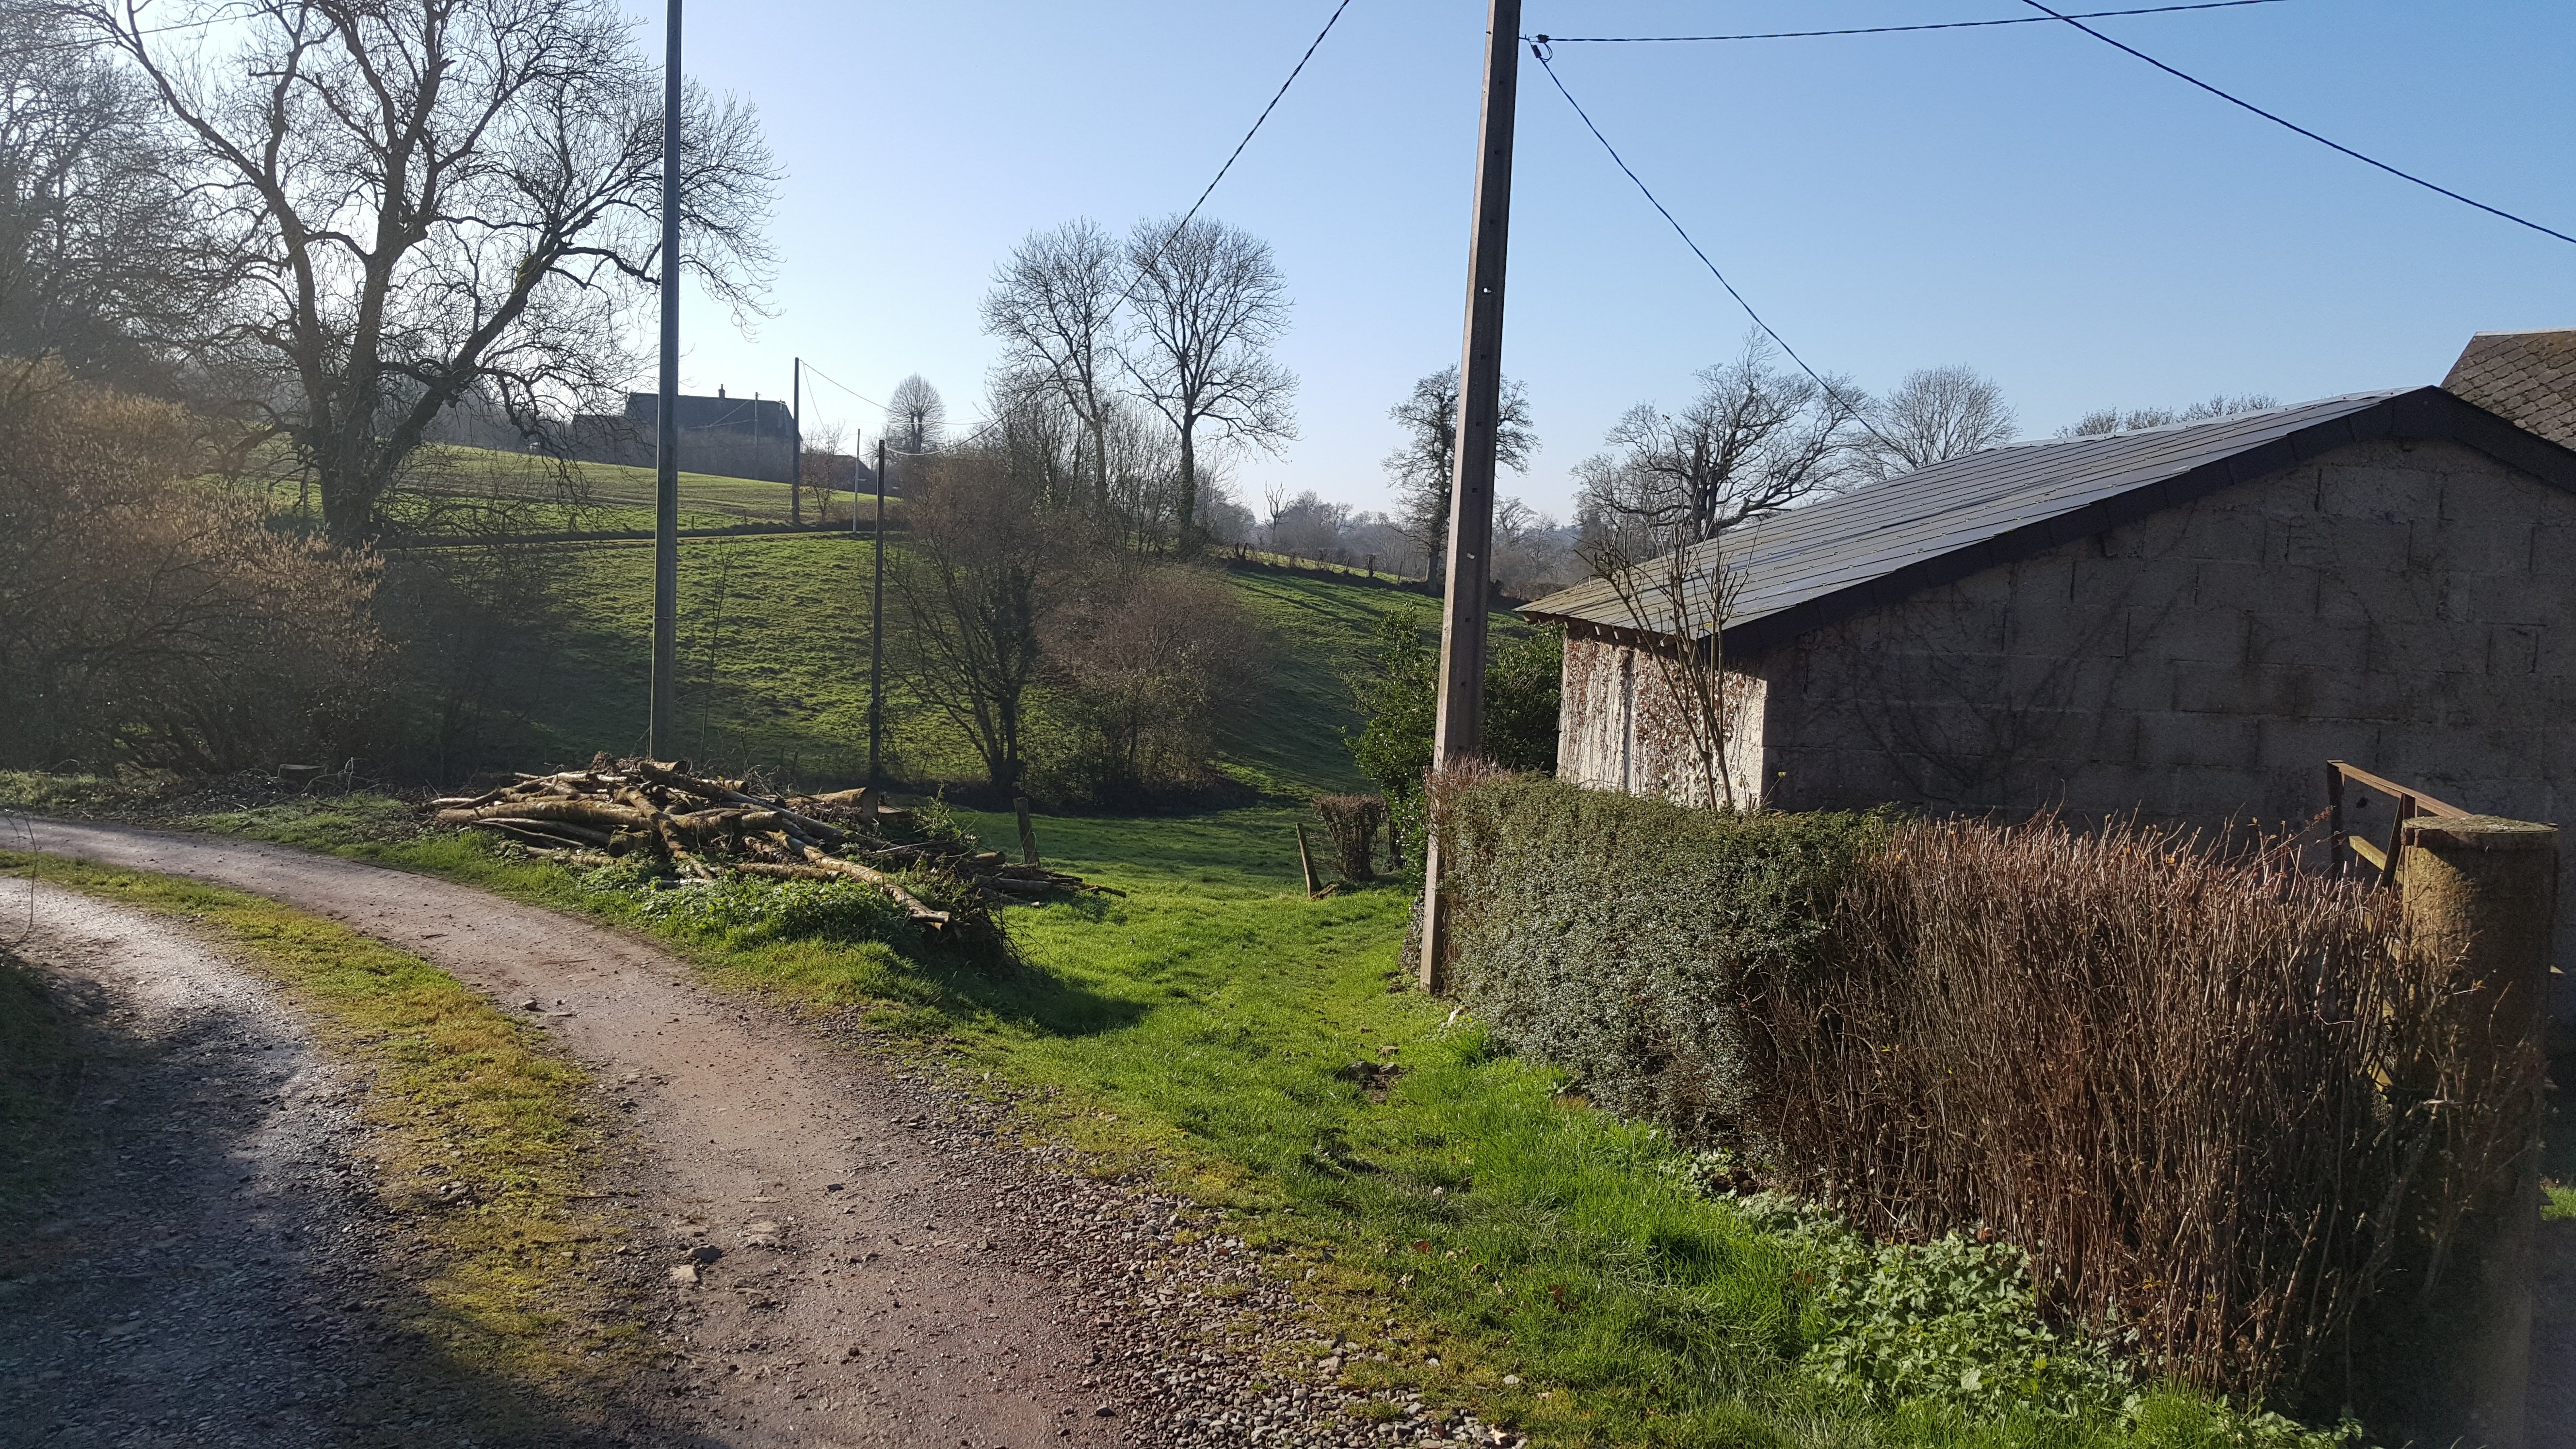 Driveway up to Eco-Gites of Lenault, Normandy, France